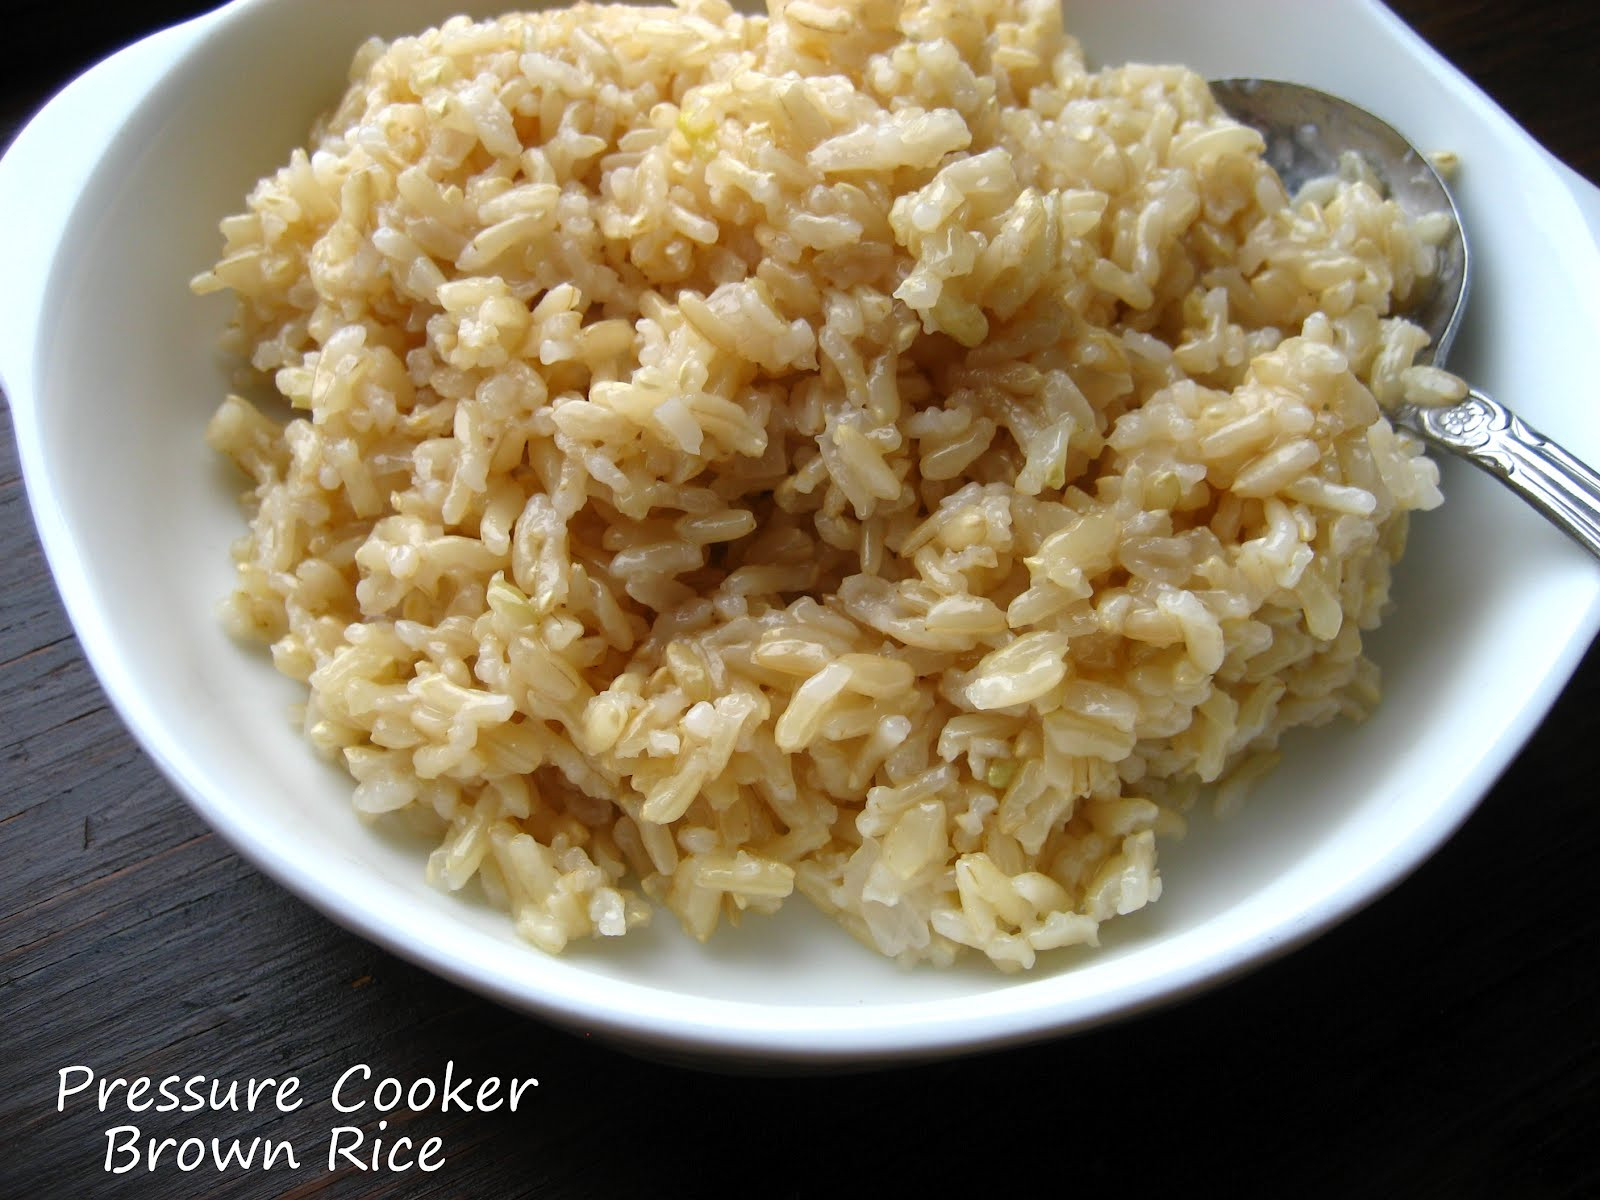 Cook Brown Rice In Microwave
 Home Cooking In Montana Pressure Cooker Brown Rice